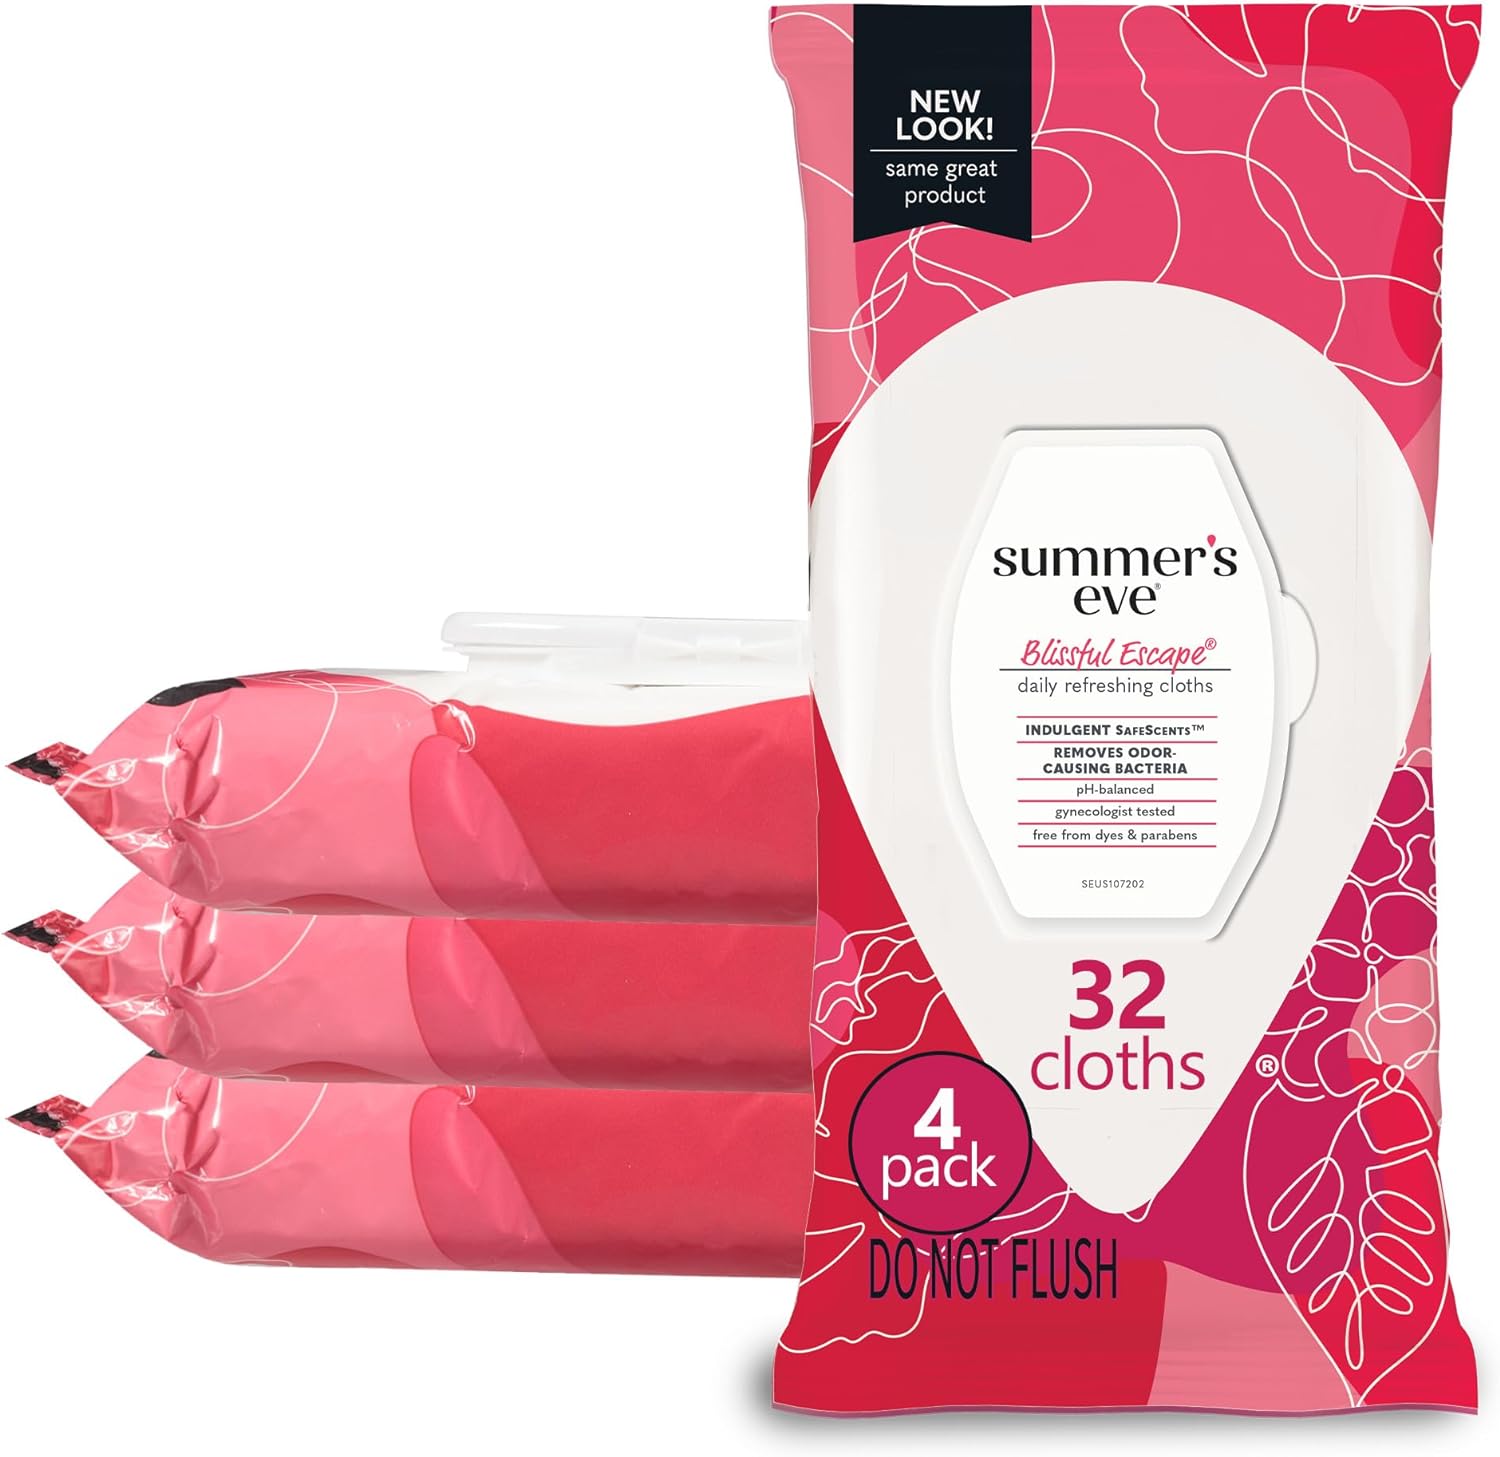 4-Pack 32-Count Summer's Eve Daily Refreshing Feminine Wipes (Blissful Escape) $7.85 w/ S&S ($1.95 each) + Free Shipping w/ Prime or $35+